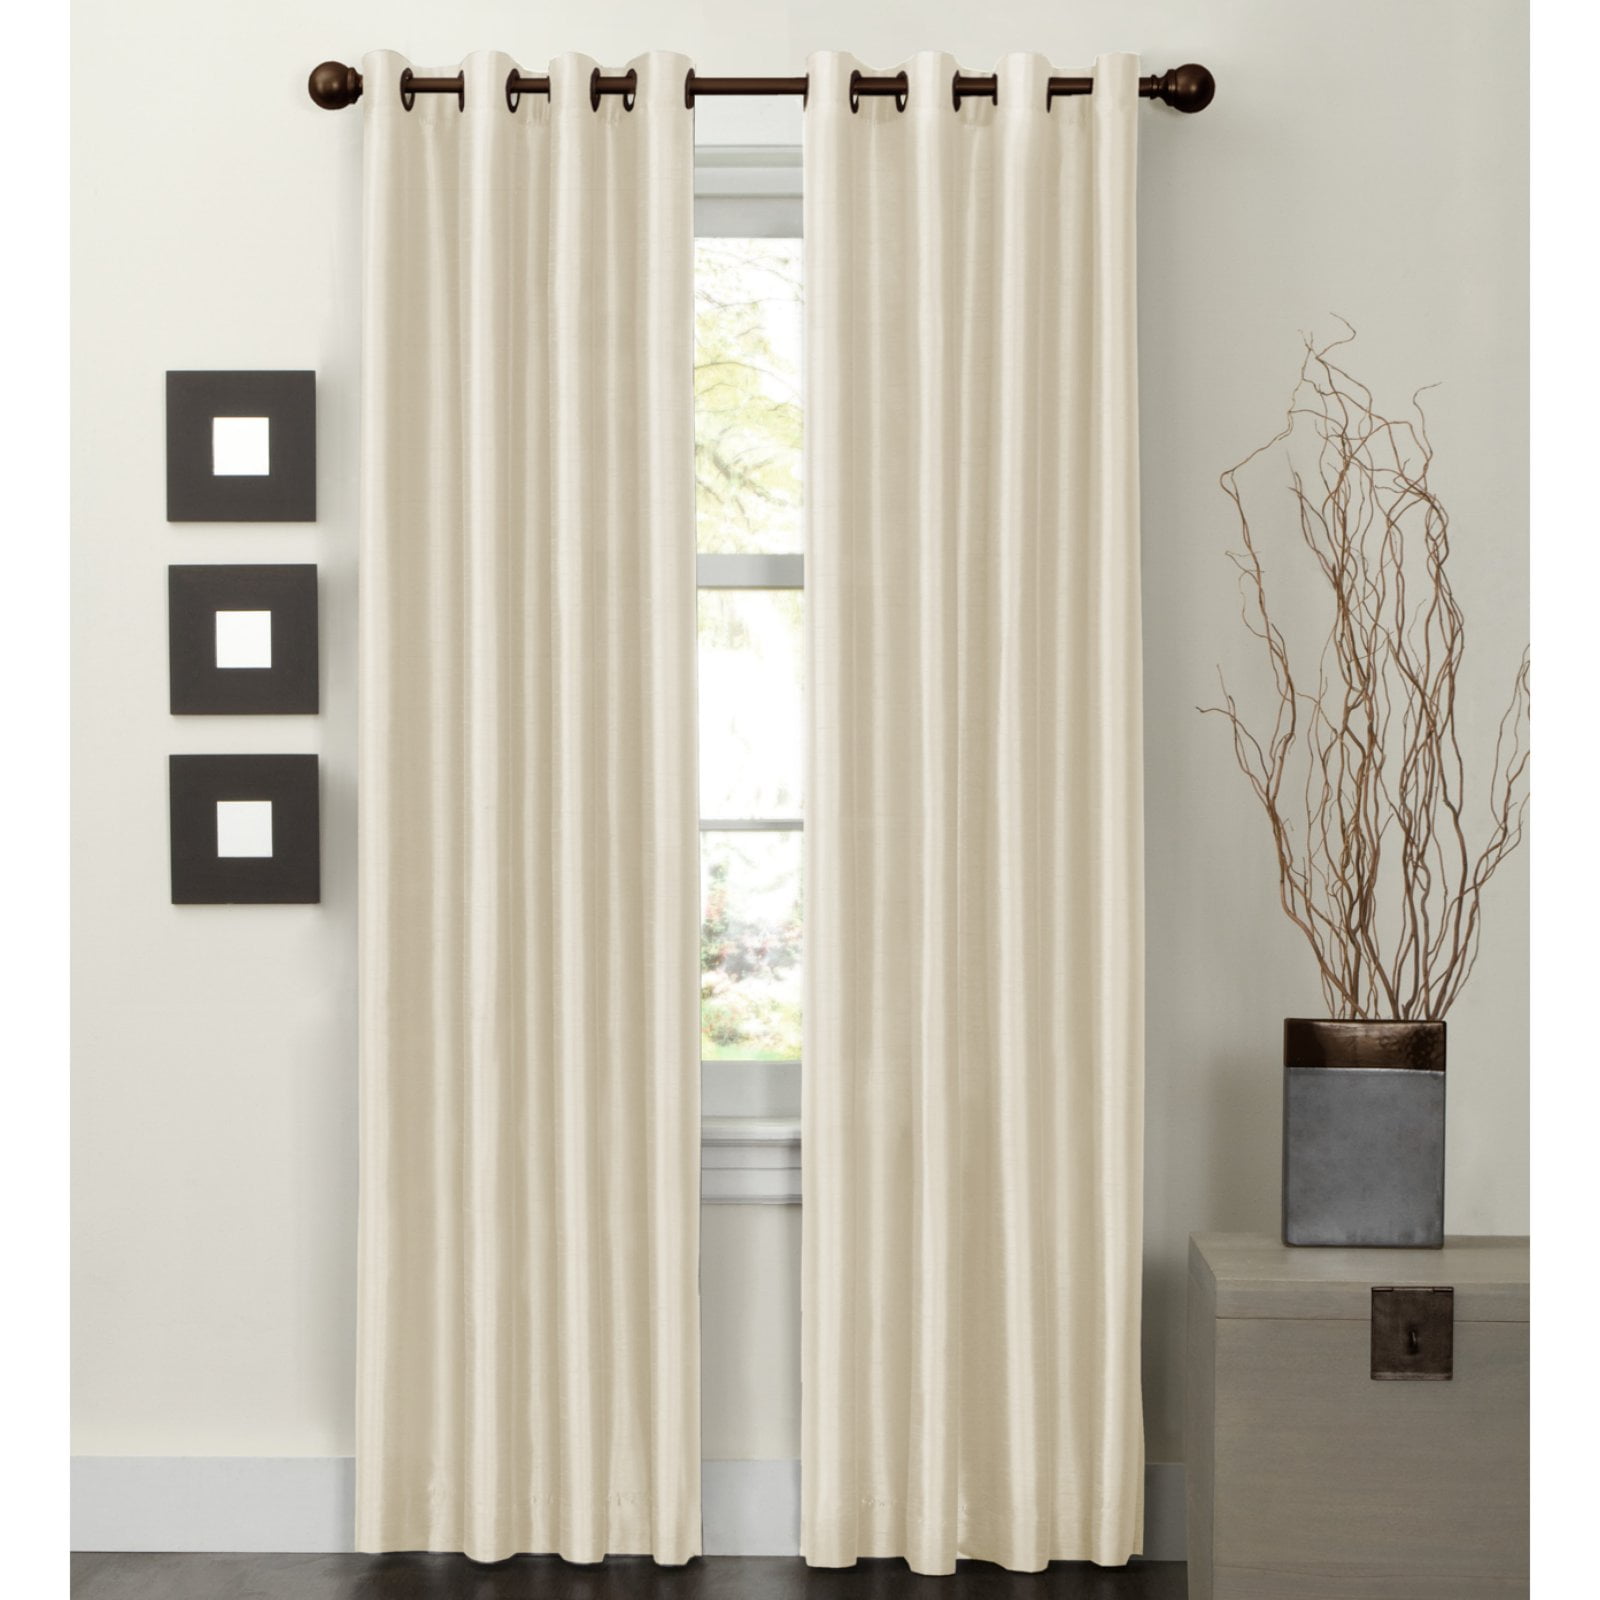 2PC Faux Silk Blackout Window Curtain Energy Saver in Multiple Colors&Sizes 